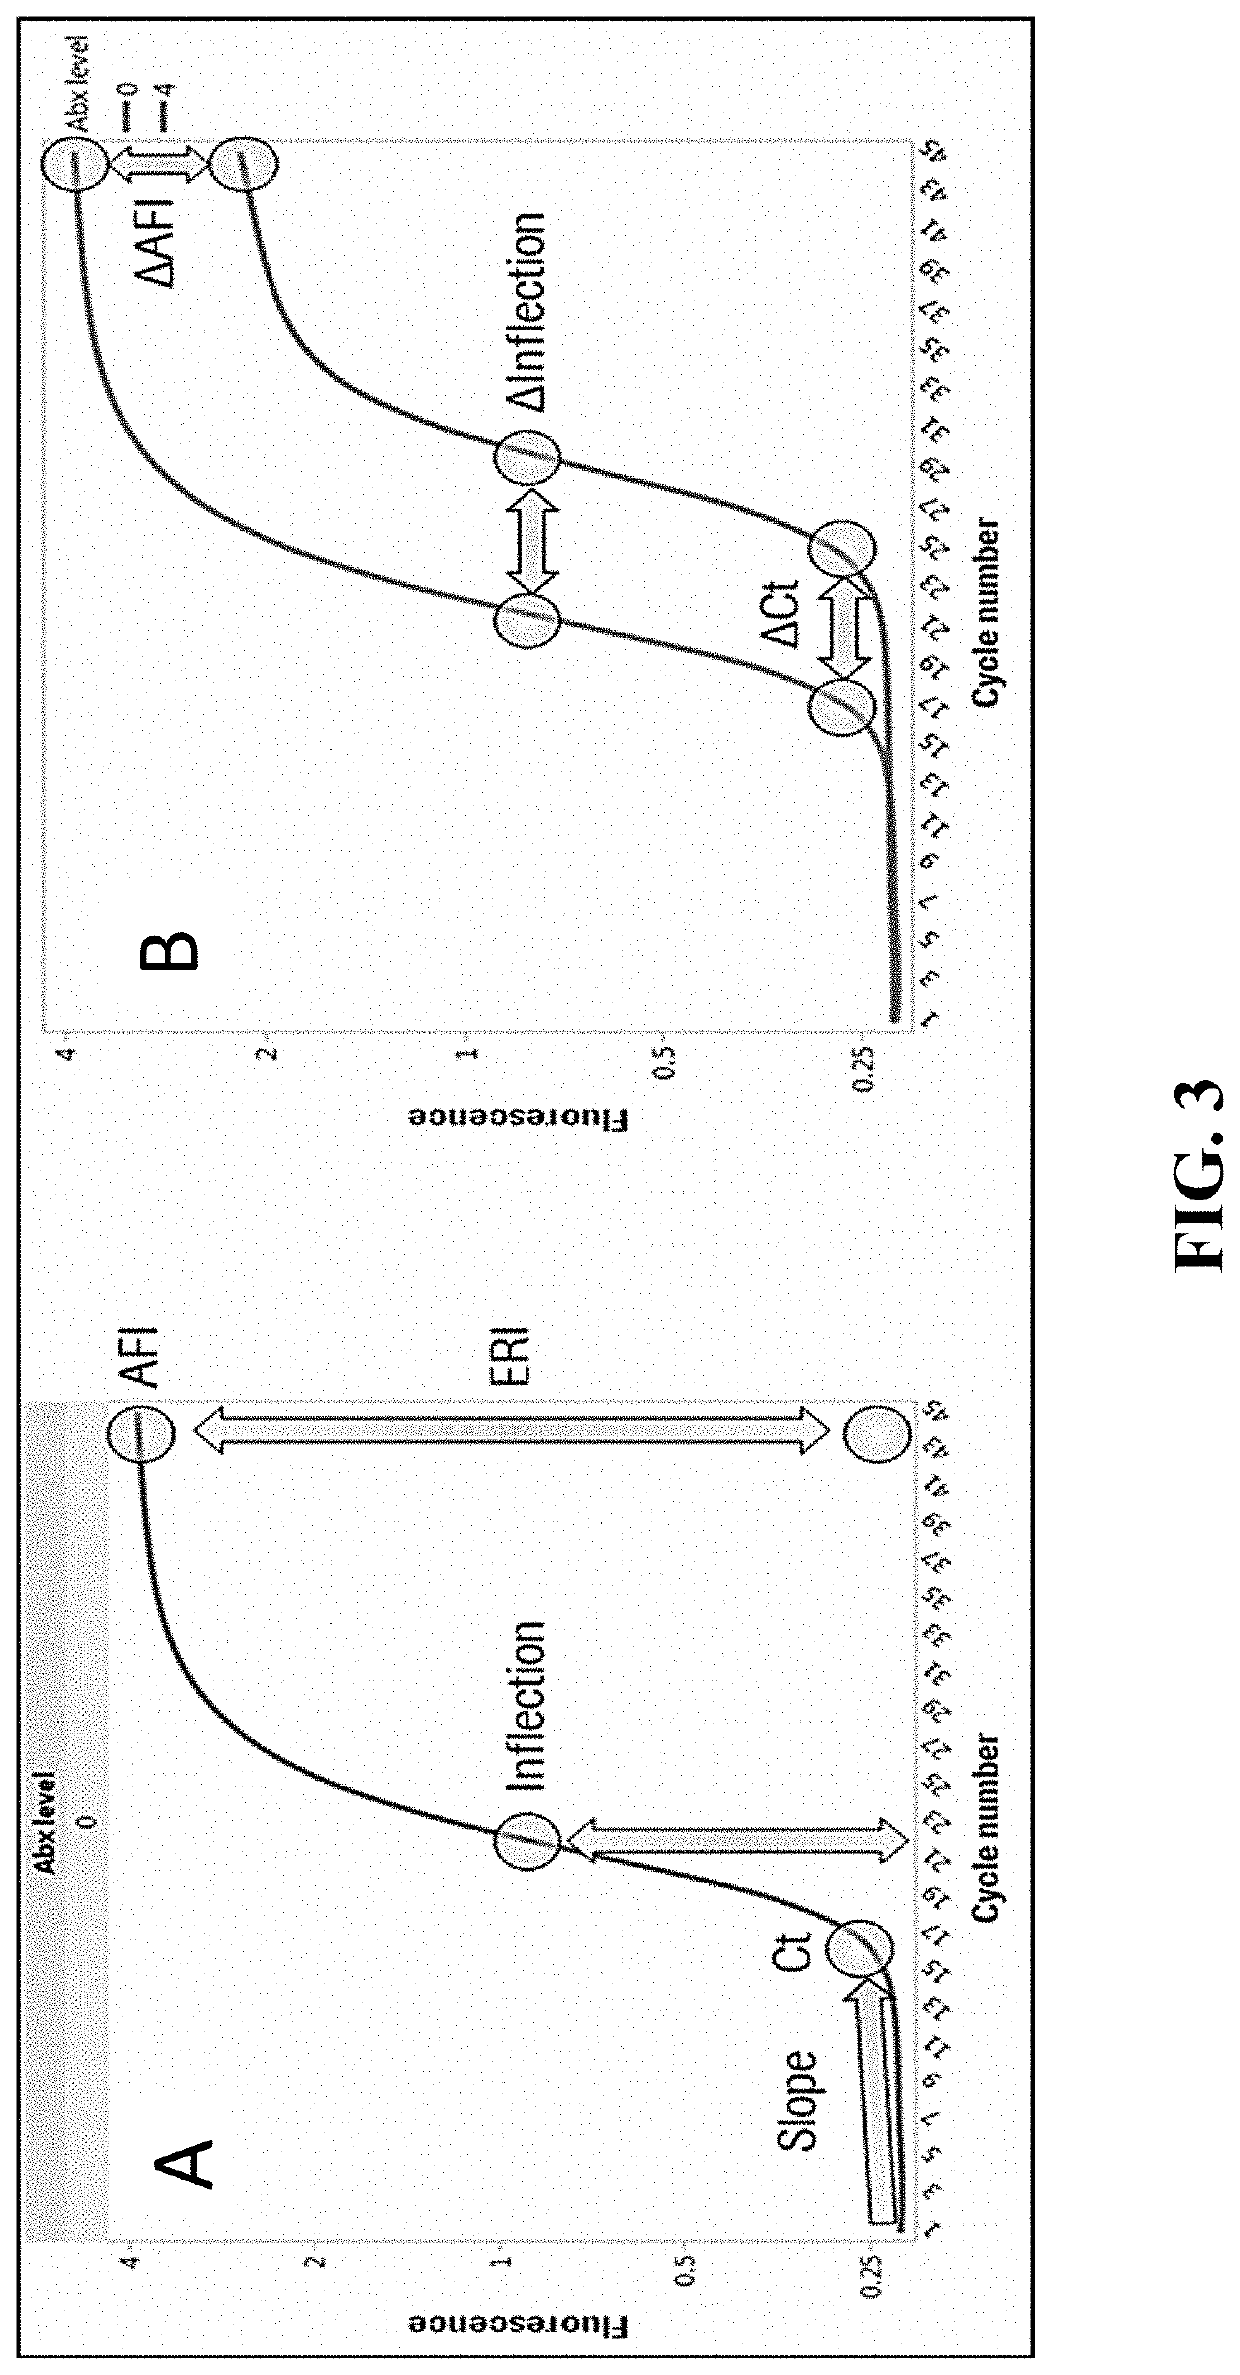 Compositions and methods for rapid identification and phenotypic antimicrobial susceptibility testing of bacteria and fungi